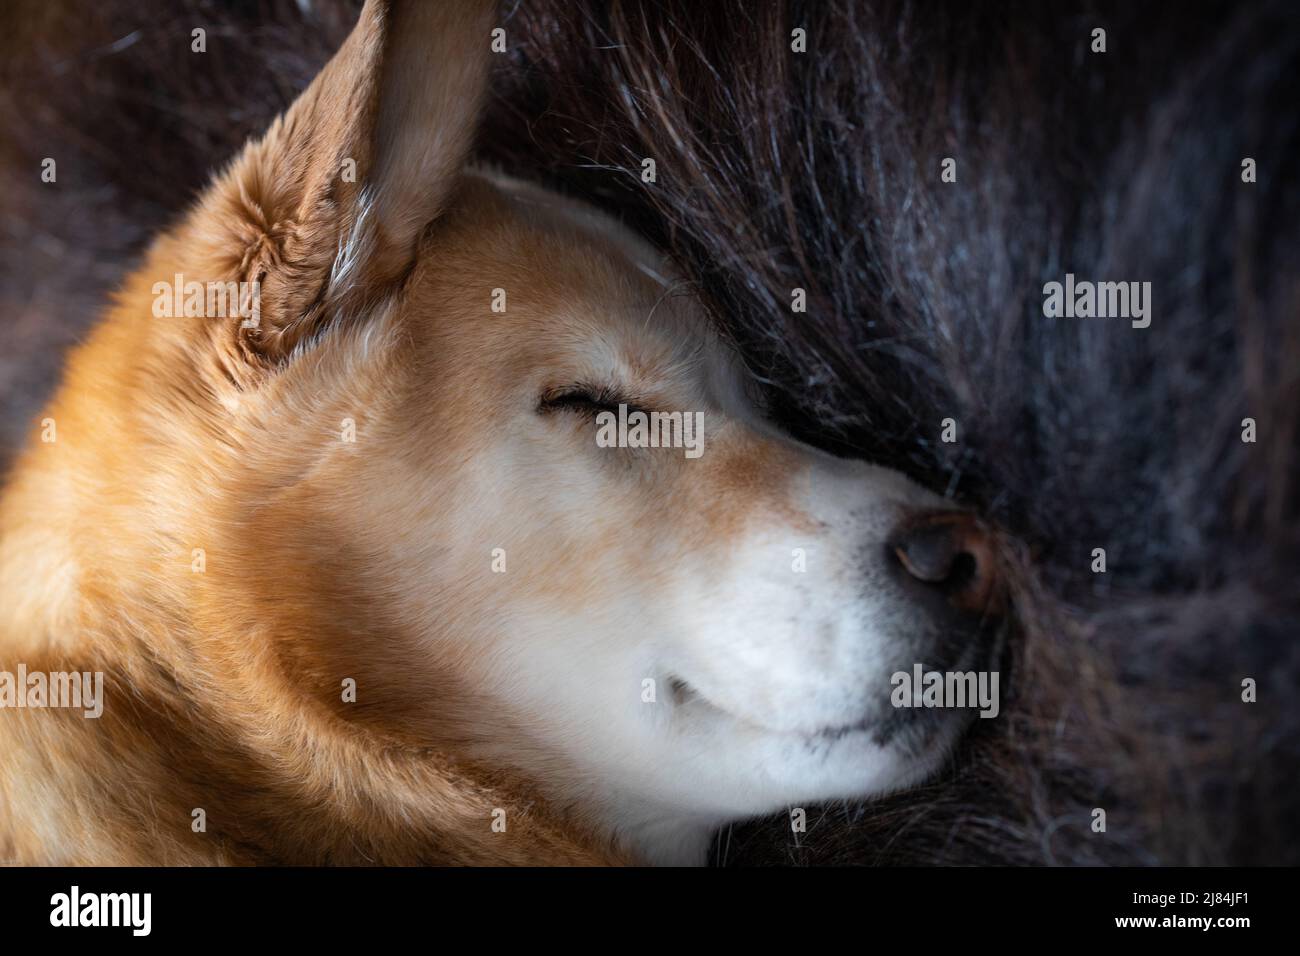 Close-up of a sleeping yellow Labrador Retriever dog lying on a long-haired rug of muskox, Arviat, Nunavut Canada Stock Photo